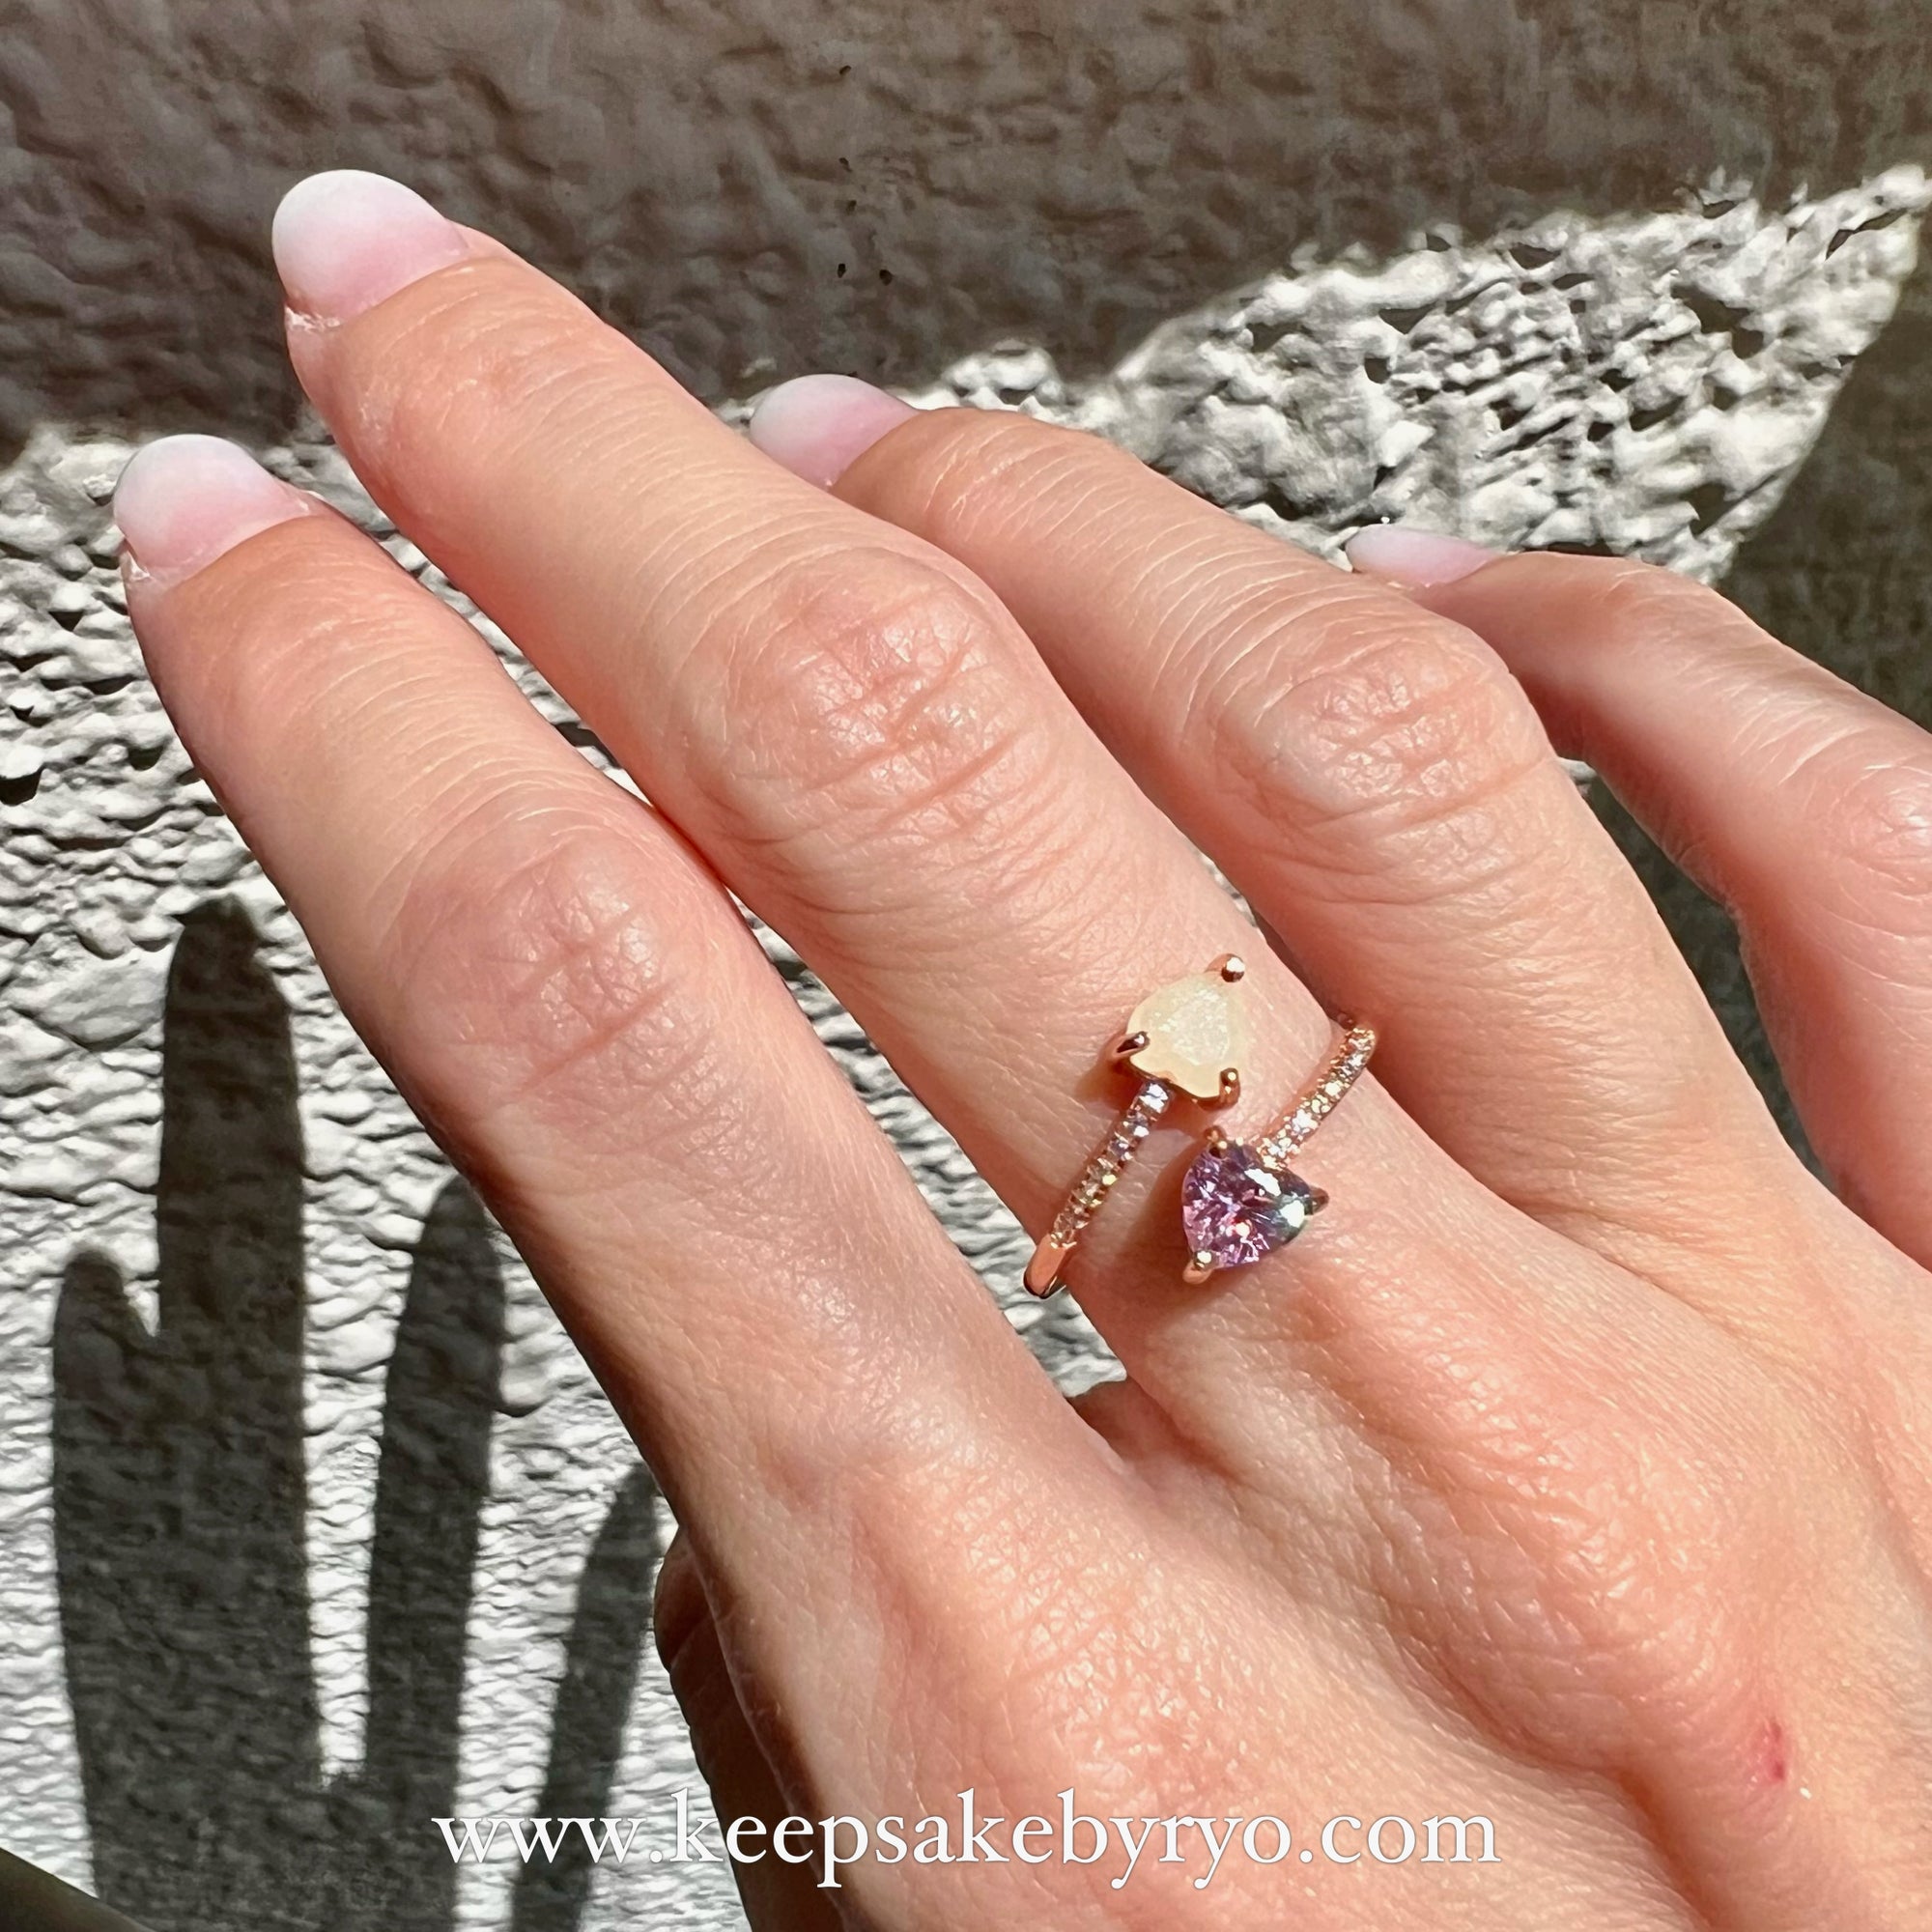 SOLITAIRE: HART RING WITH HEART SHAPED STONE